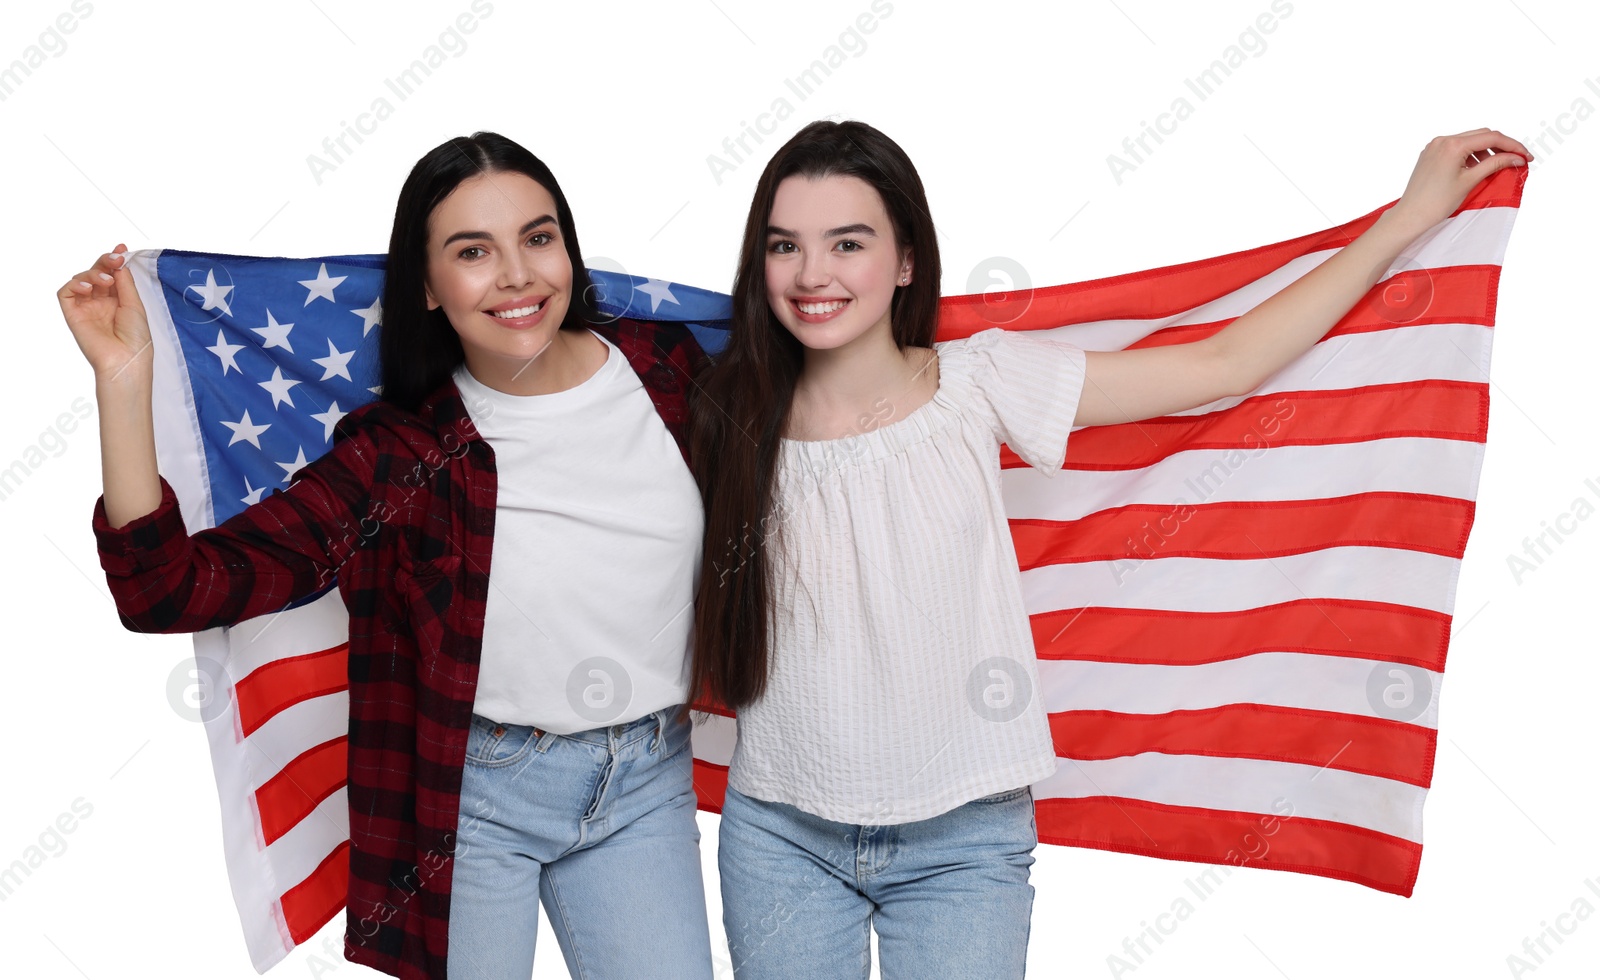 Image of 4th of July - Independence day of America. Happy mother and daughter with national flag of United States on white background